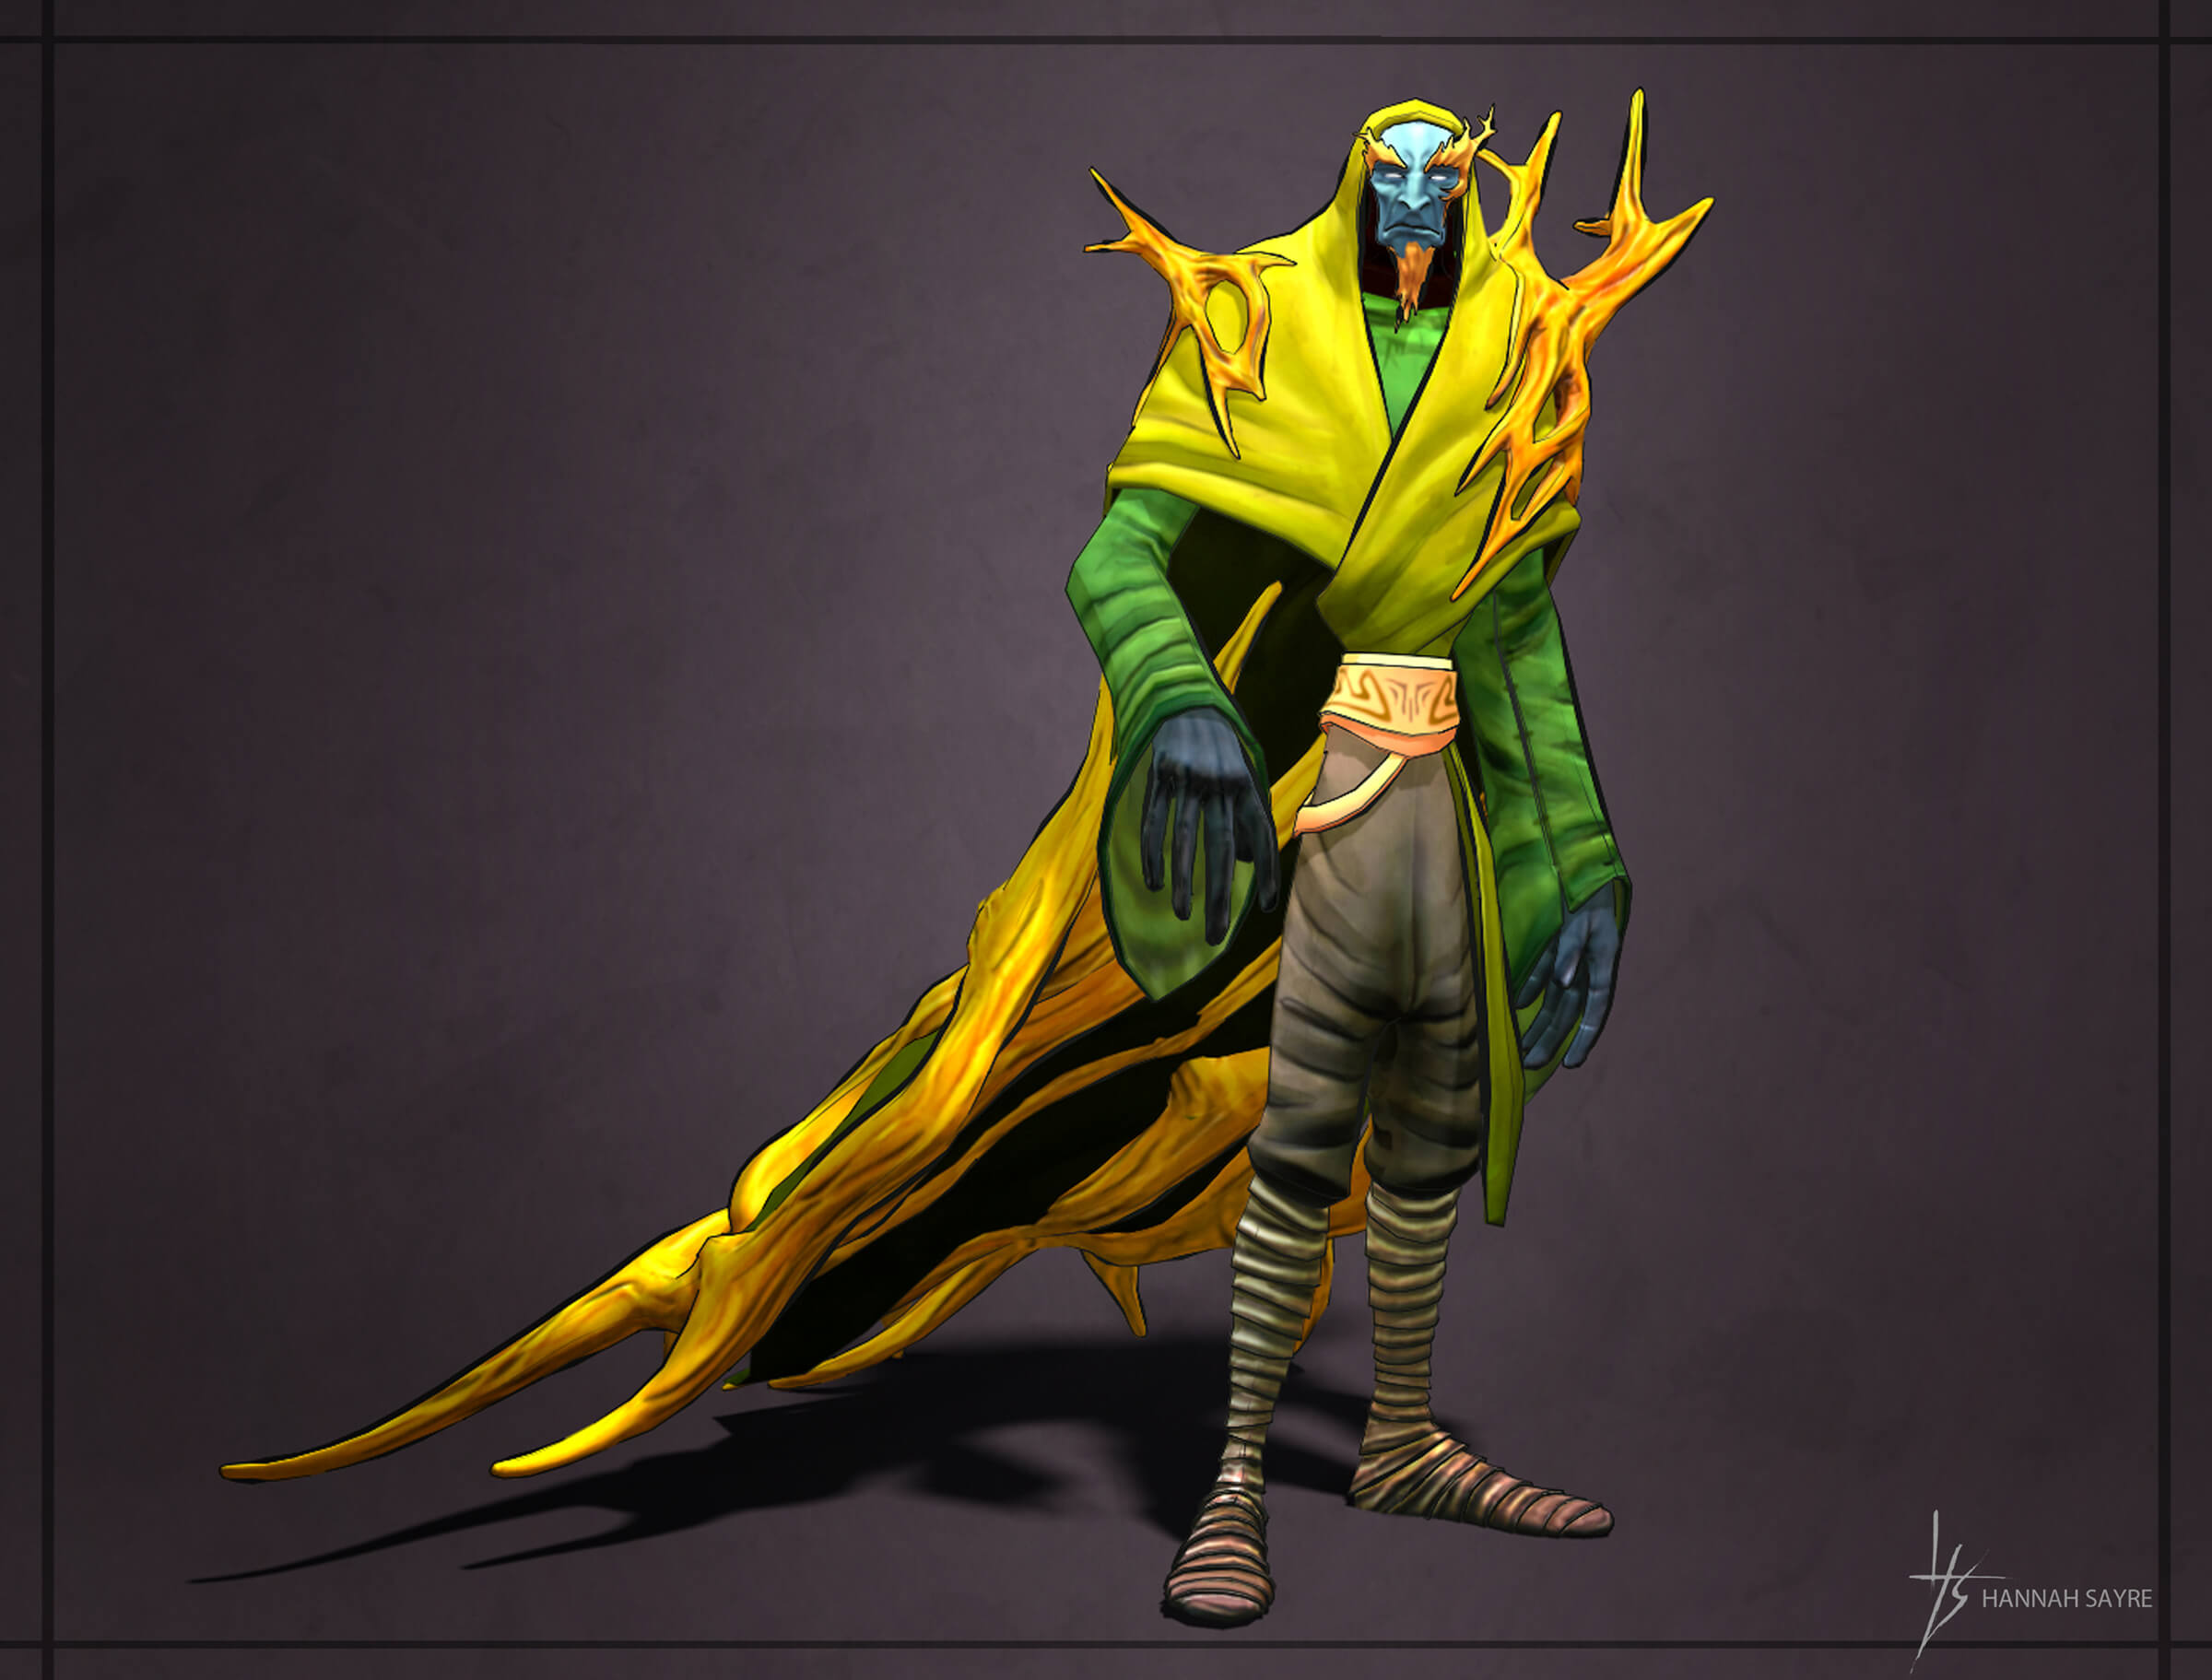 computer-generated 3D model of "death," one of the 4 horsemen of the apocalypse, in a flowing yellow robe